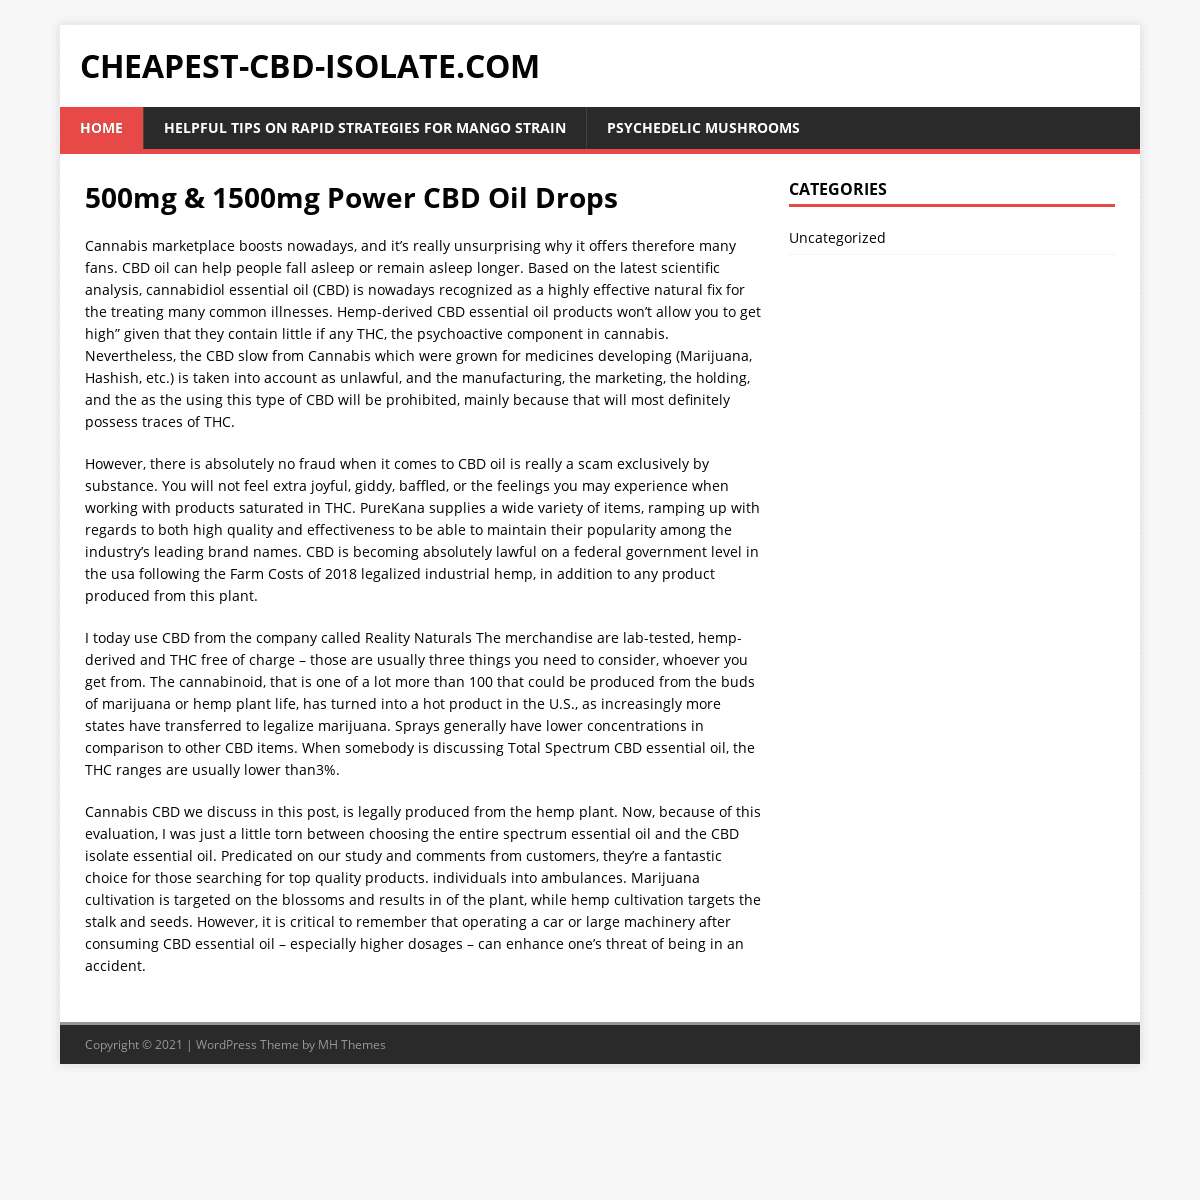 A complete backup of https://cheapest-cbd-isolate.com